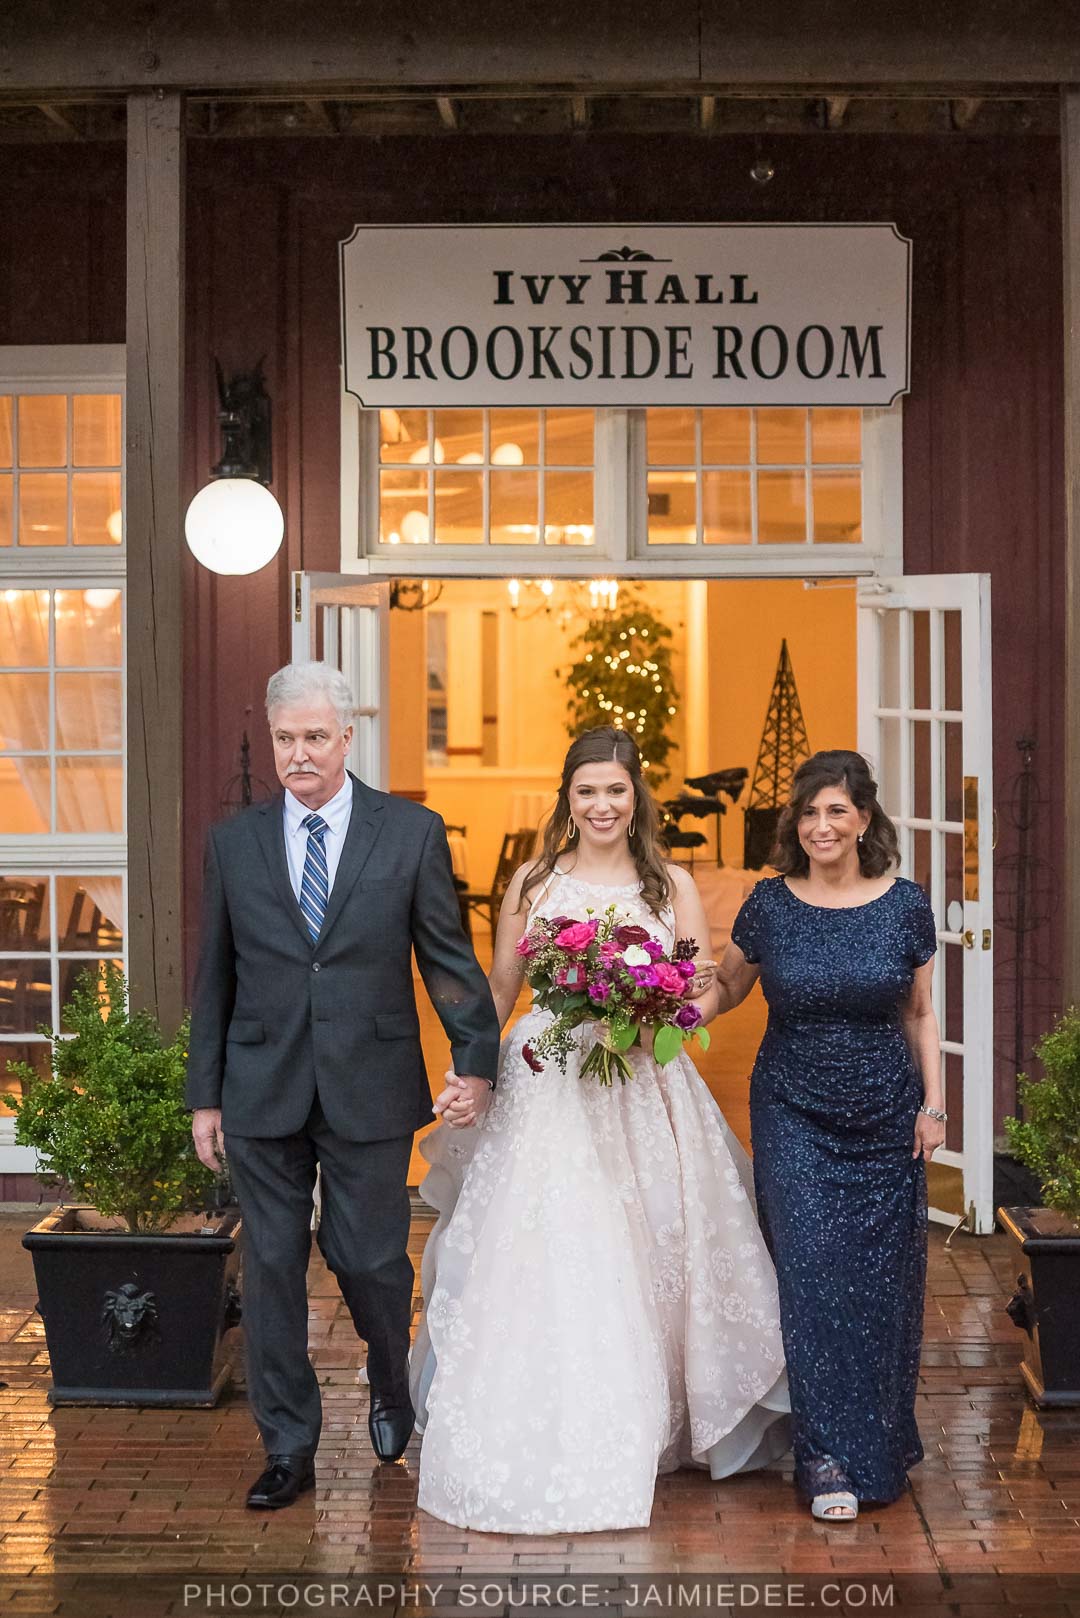 Ivy Hall Roswell Wedding Pictures - bride walking with parents down aisle